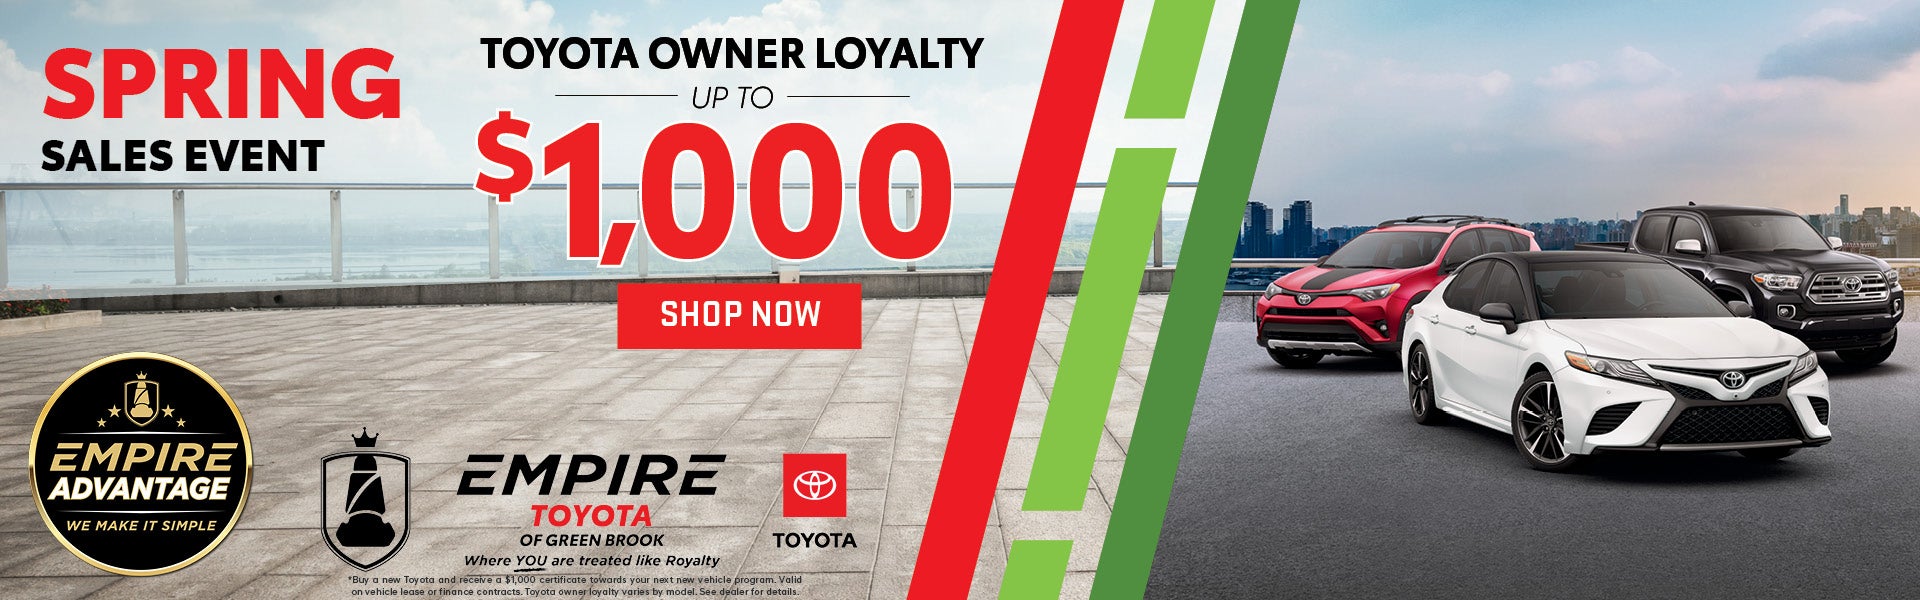 Up to $1,000 Toyota Owner Loyalty